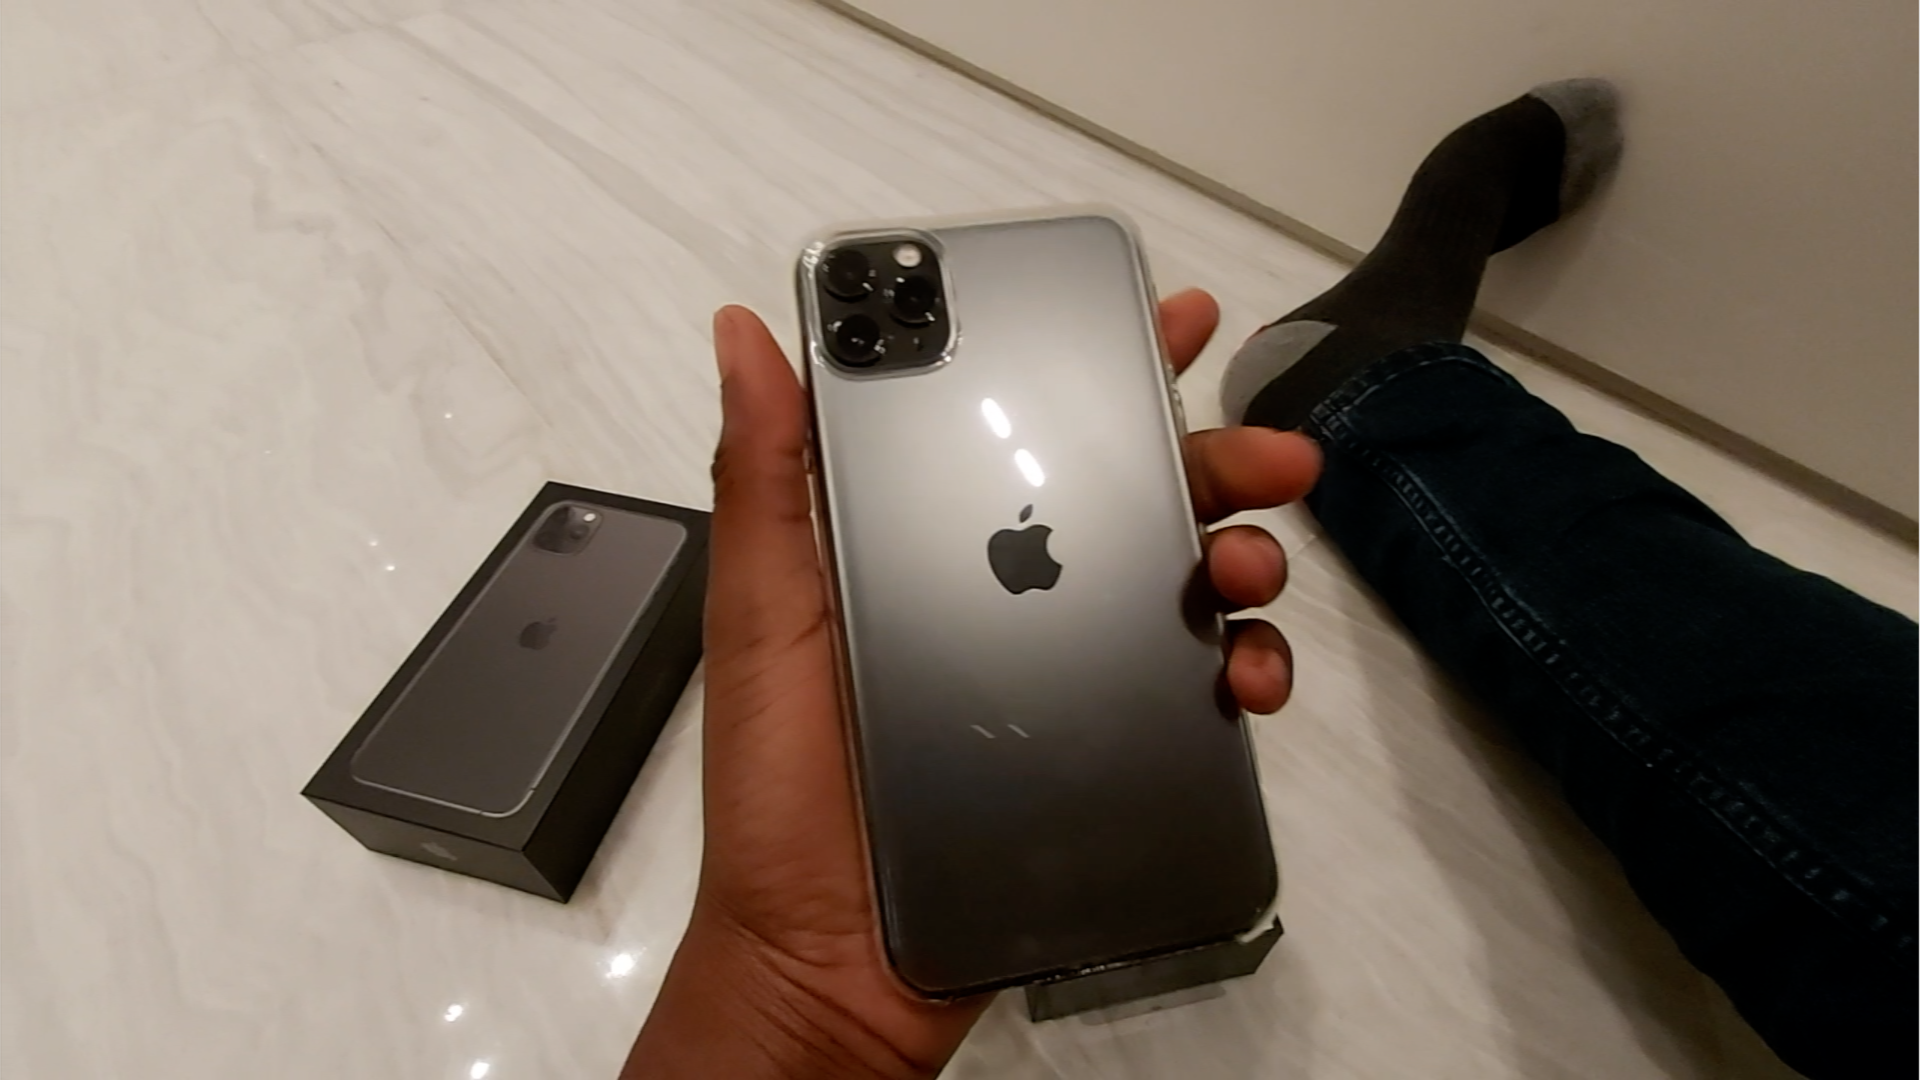 Want An iPhone 11 Pro Max For Christmas Too